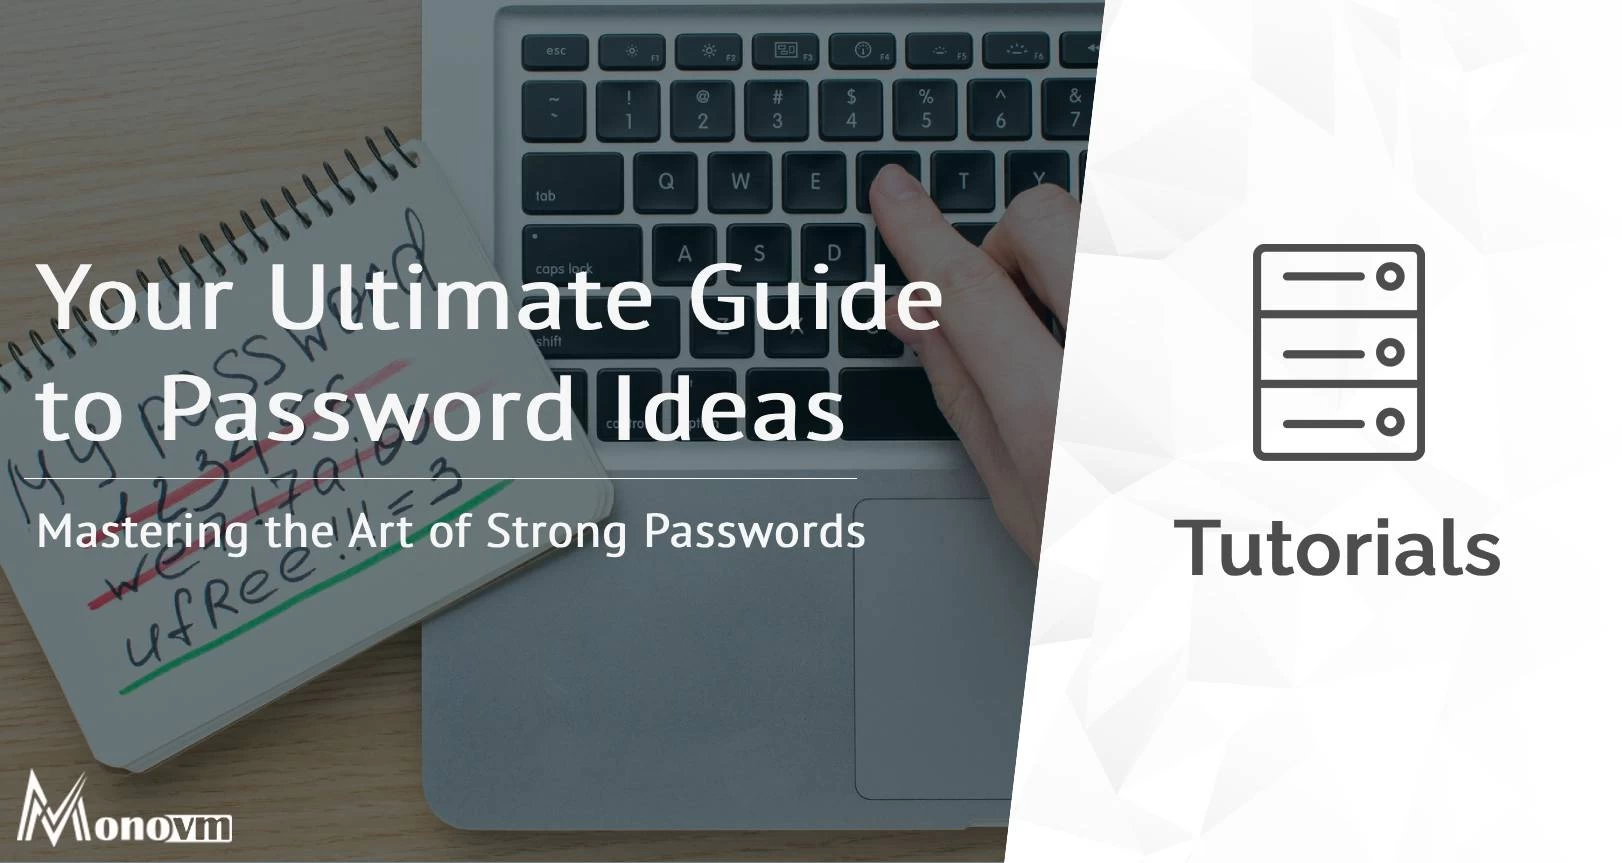 Mastering the Art of Strong Passwords: Your Ultimate Guide to Password Ideas